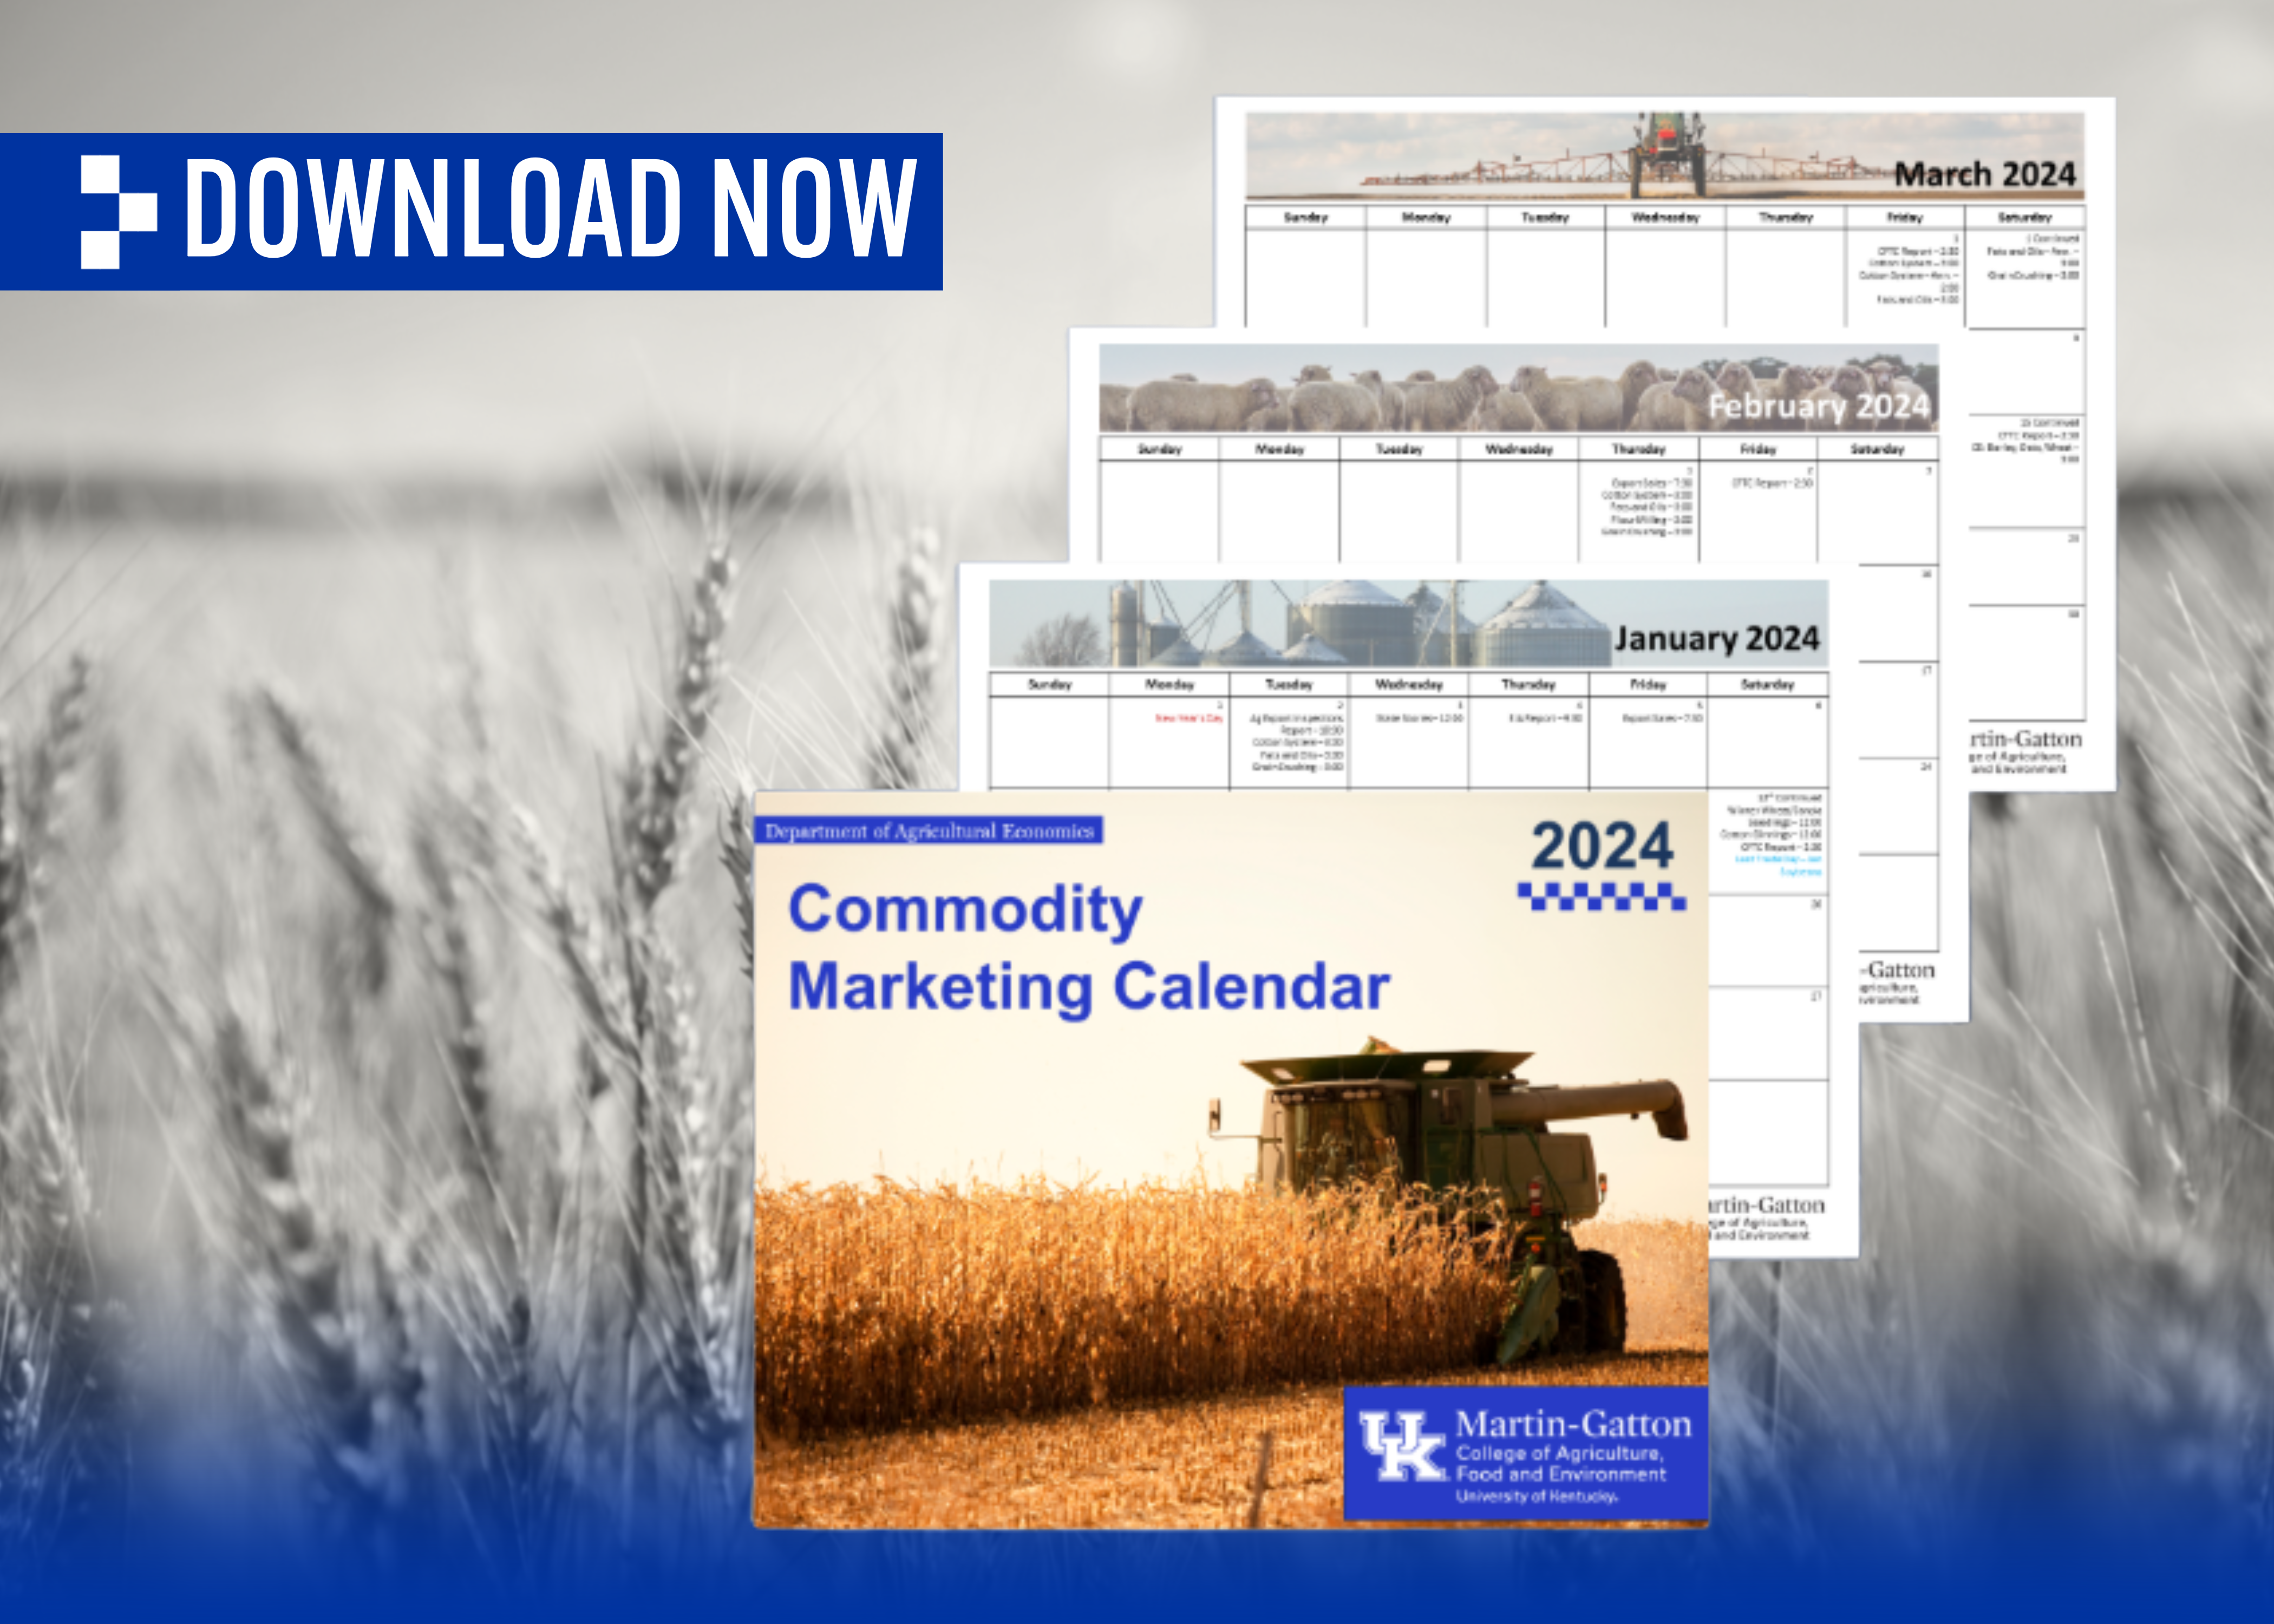 Commodity marketing calendar download now graphic